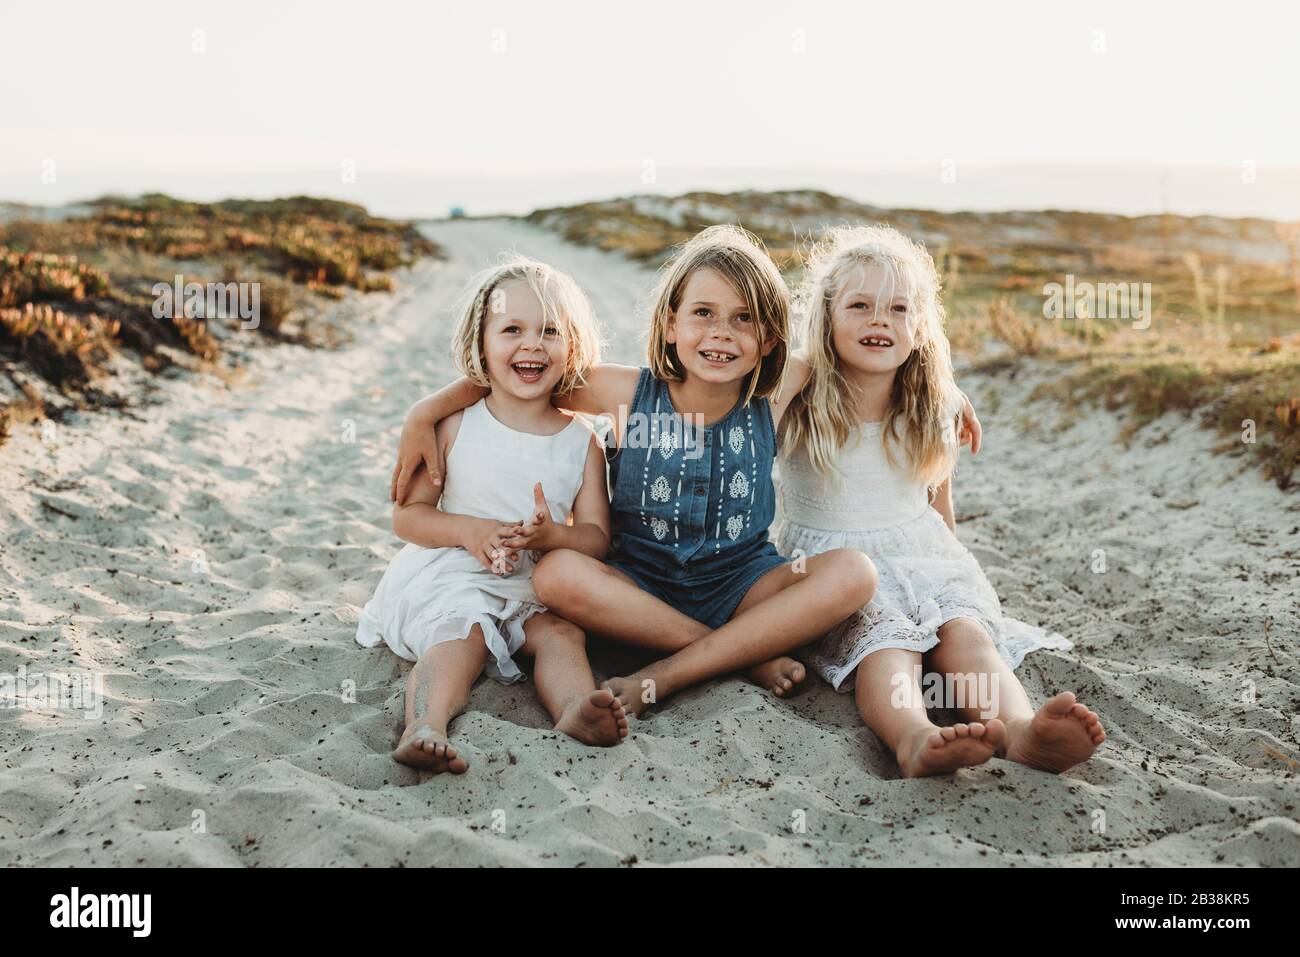 Portrait of three young sisters embracing and smiling in sand Stock Photo